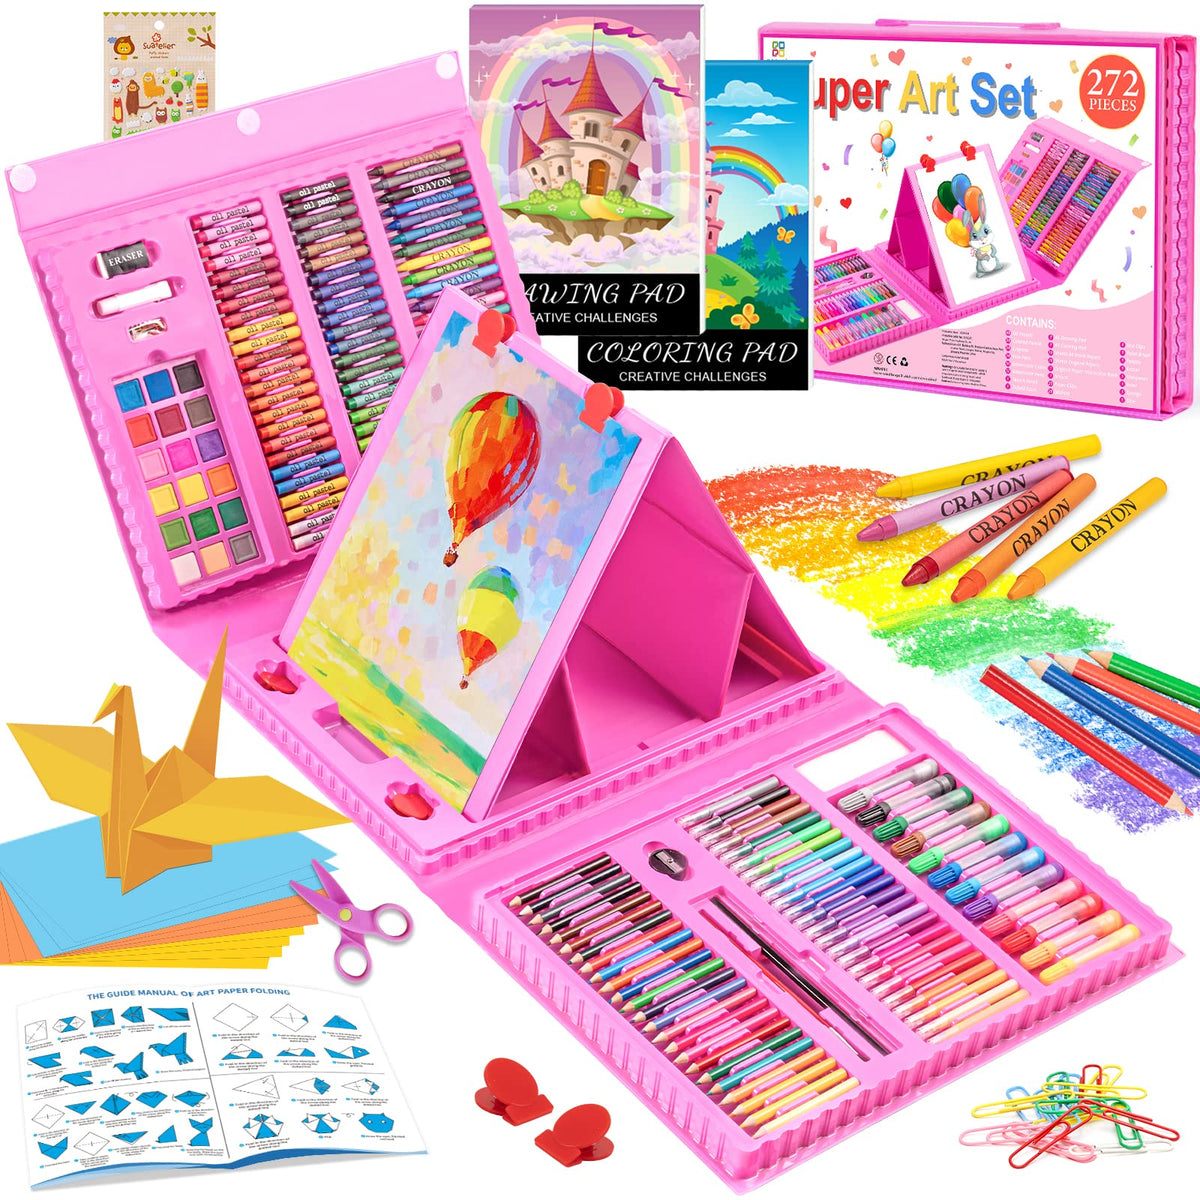 Art Supplies, 240-Piece Drawing Art kit, Gifts Art Set Case with Double  Sided Trifold Easel, Includes Oil Pastels, Crayons, Colored Pencils,  Watercolor Cakes, Sketch Pad (PINK) 